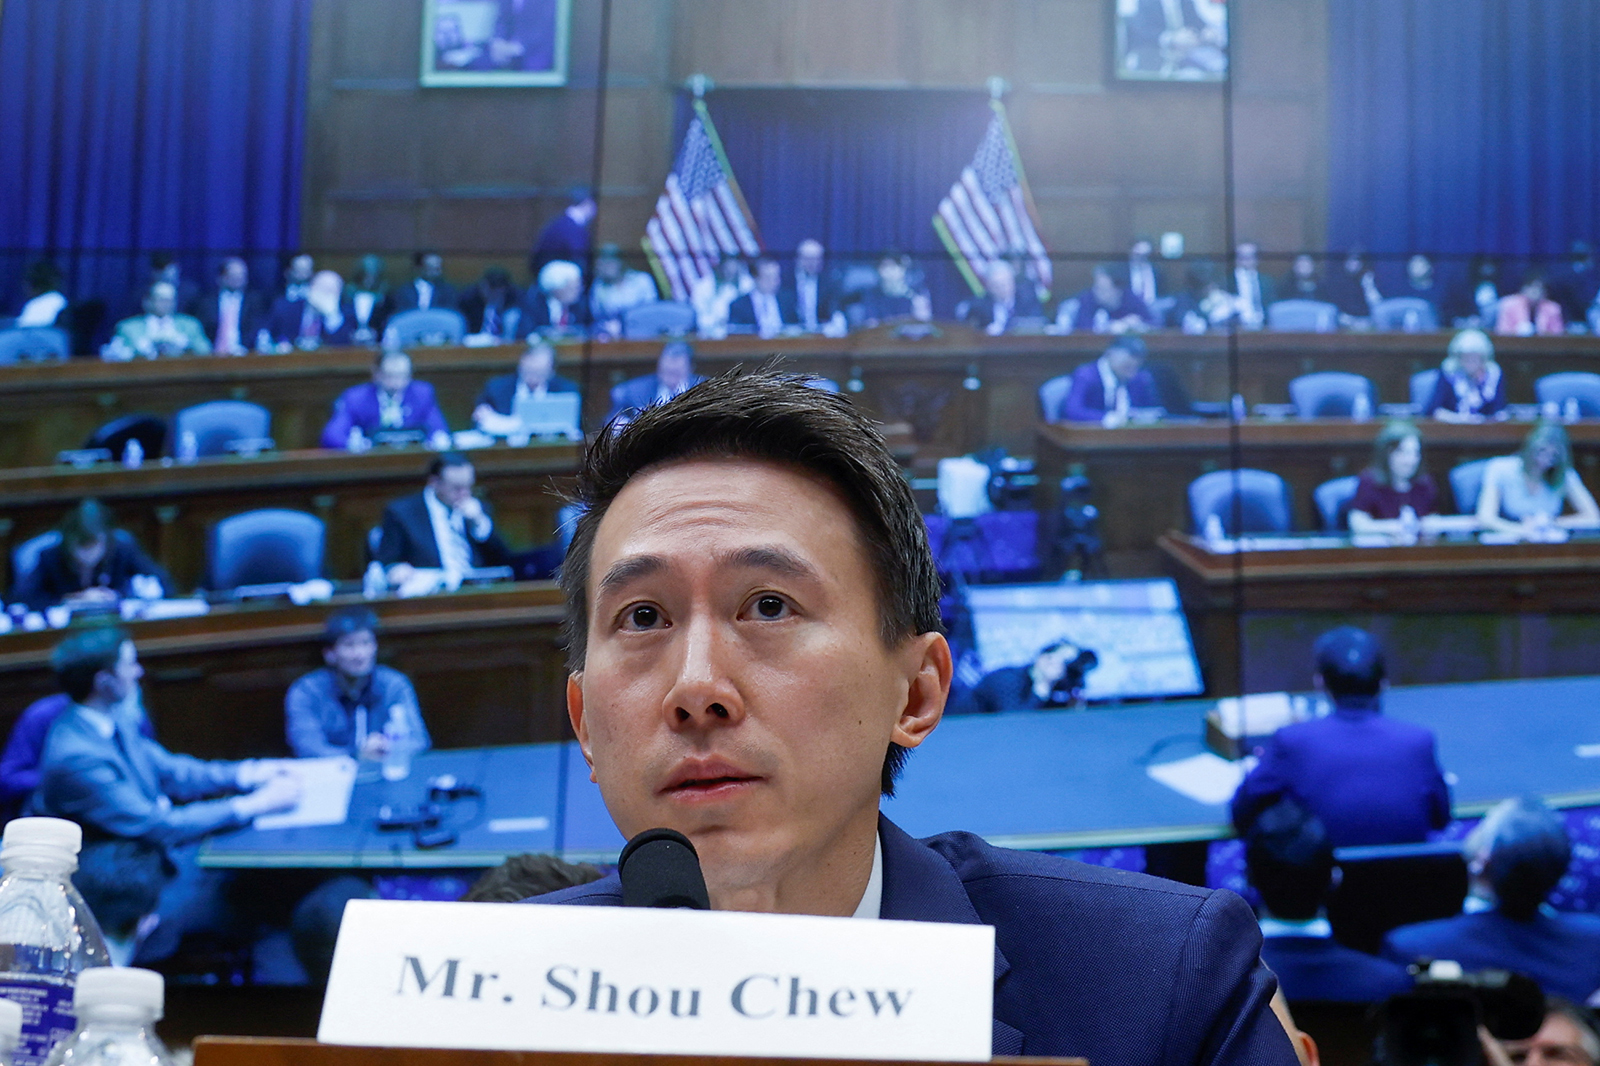 TikTok Chief Executive Shou Zi Chew testifying before a House Energy and Commerce Committee hearing on Capitol Hill in Washington, today. 